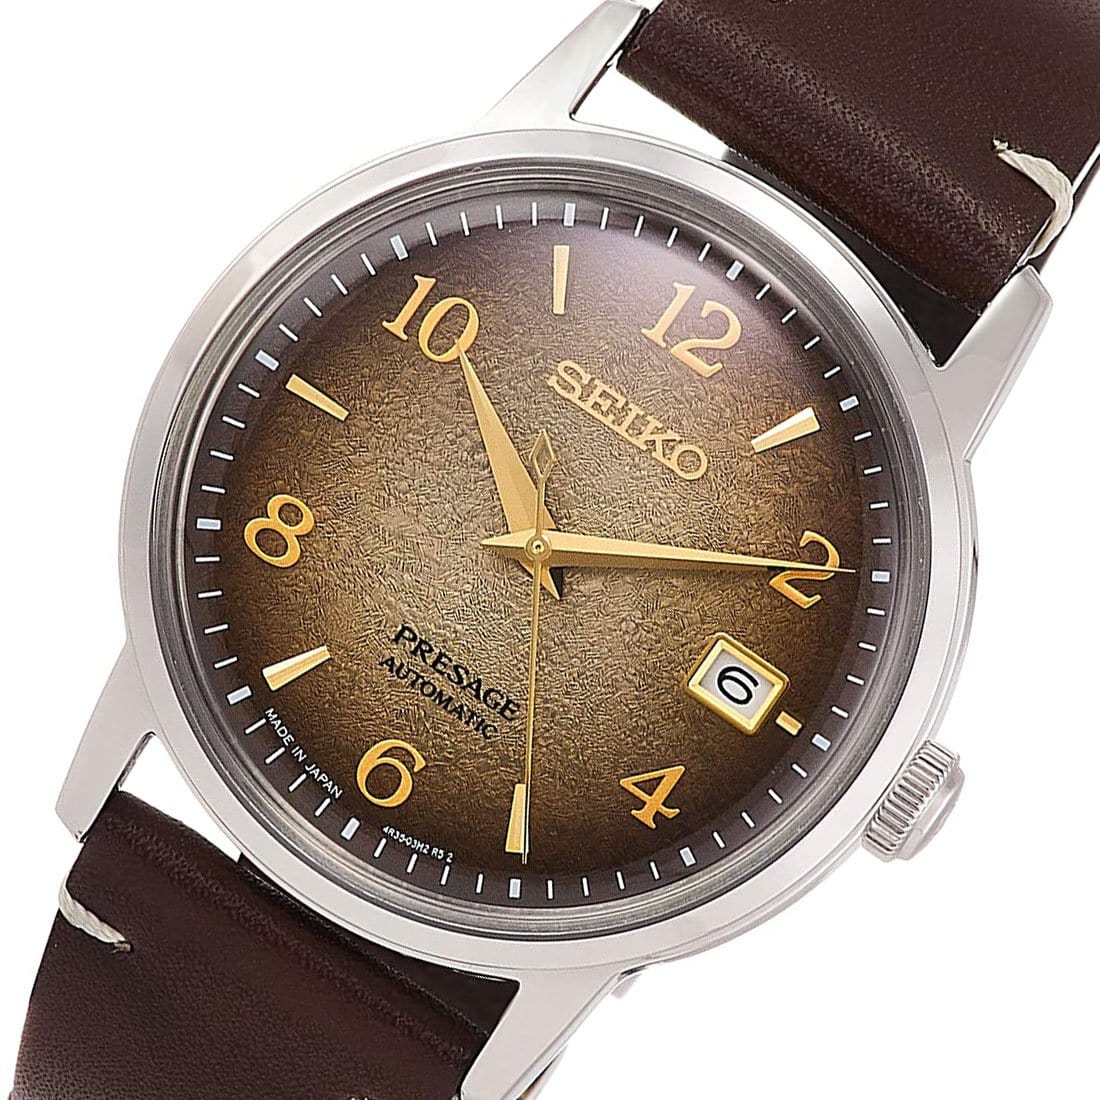 SARY183 Seiko Presage Star Bar Brown Dial Automatic Limited Edition Mens JDM Watch